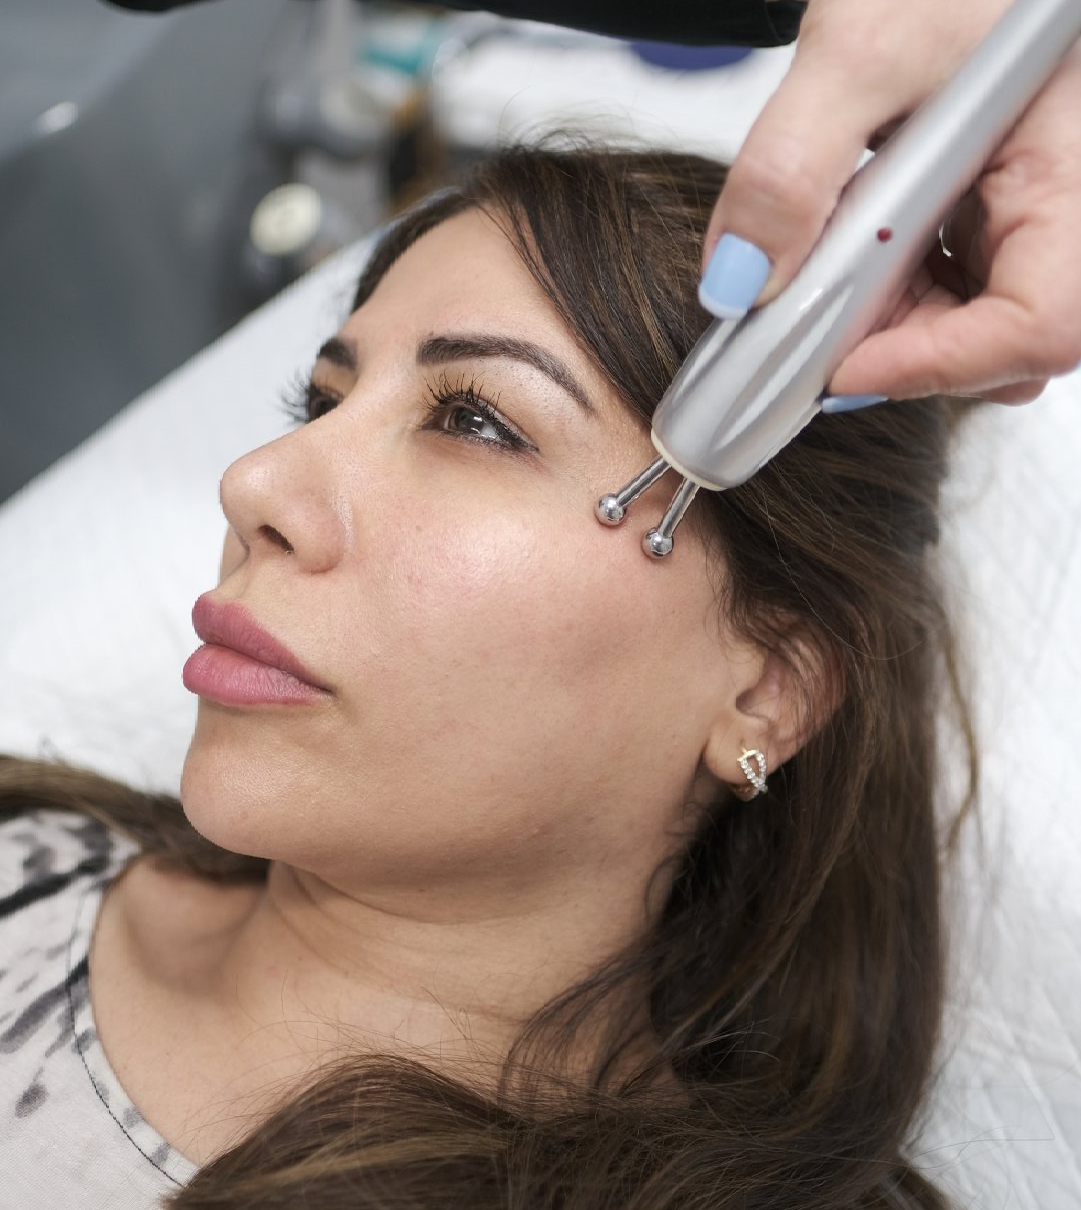 woman getting radiofrequency treatment around eyes